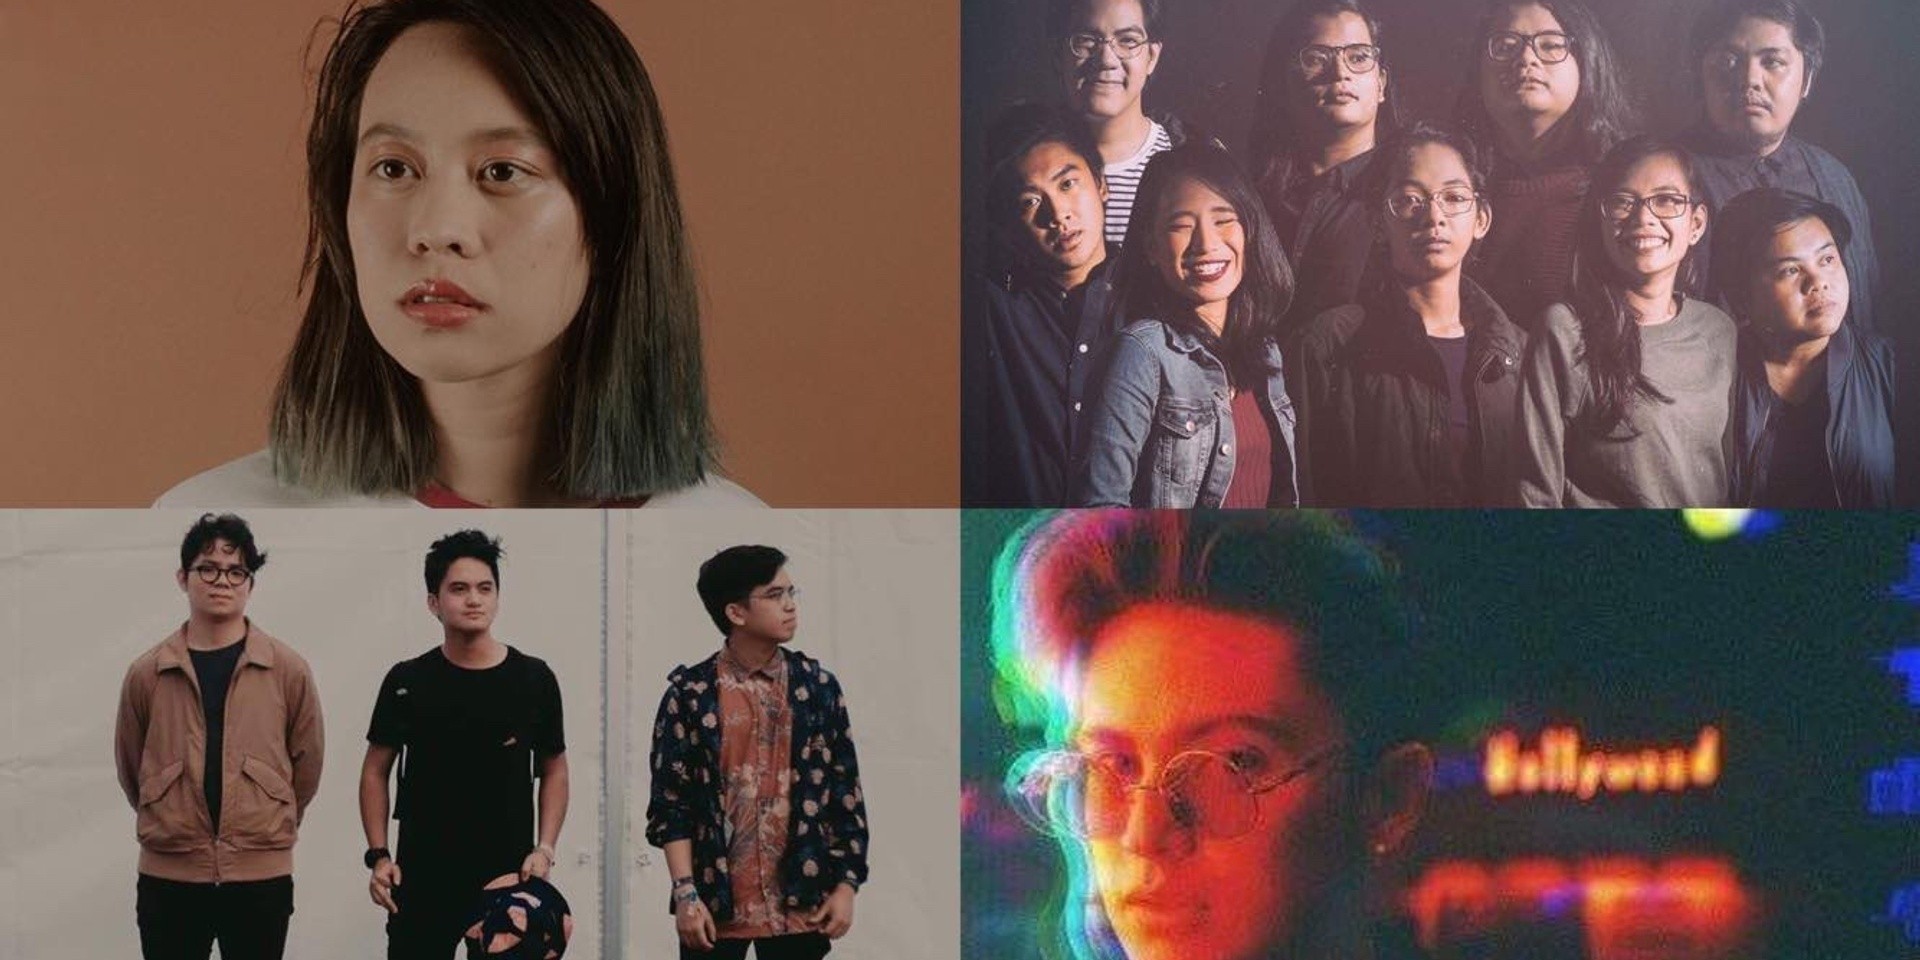 3rd Wish FM 107.5 Music Awards reveal nominees - James Reid, Tom's Story, and more